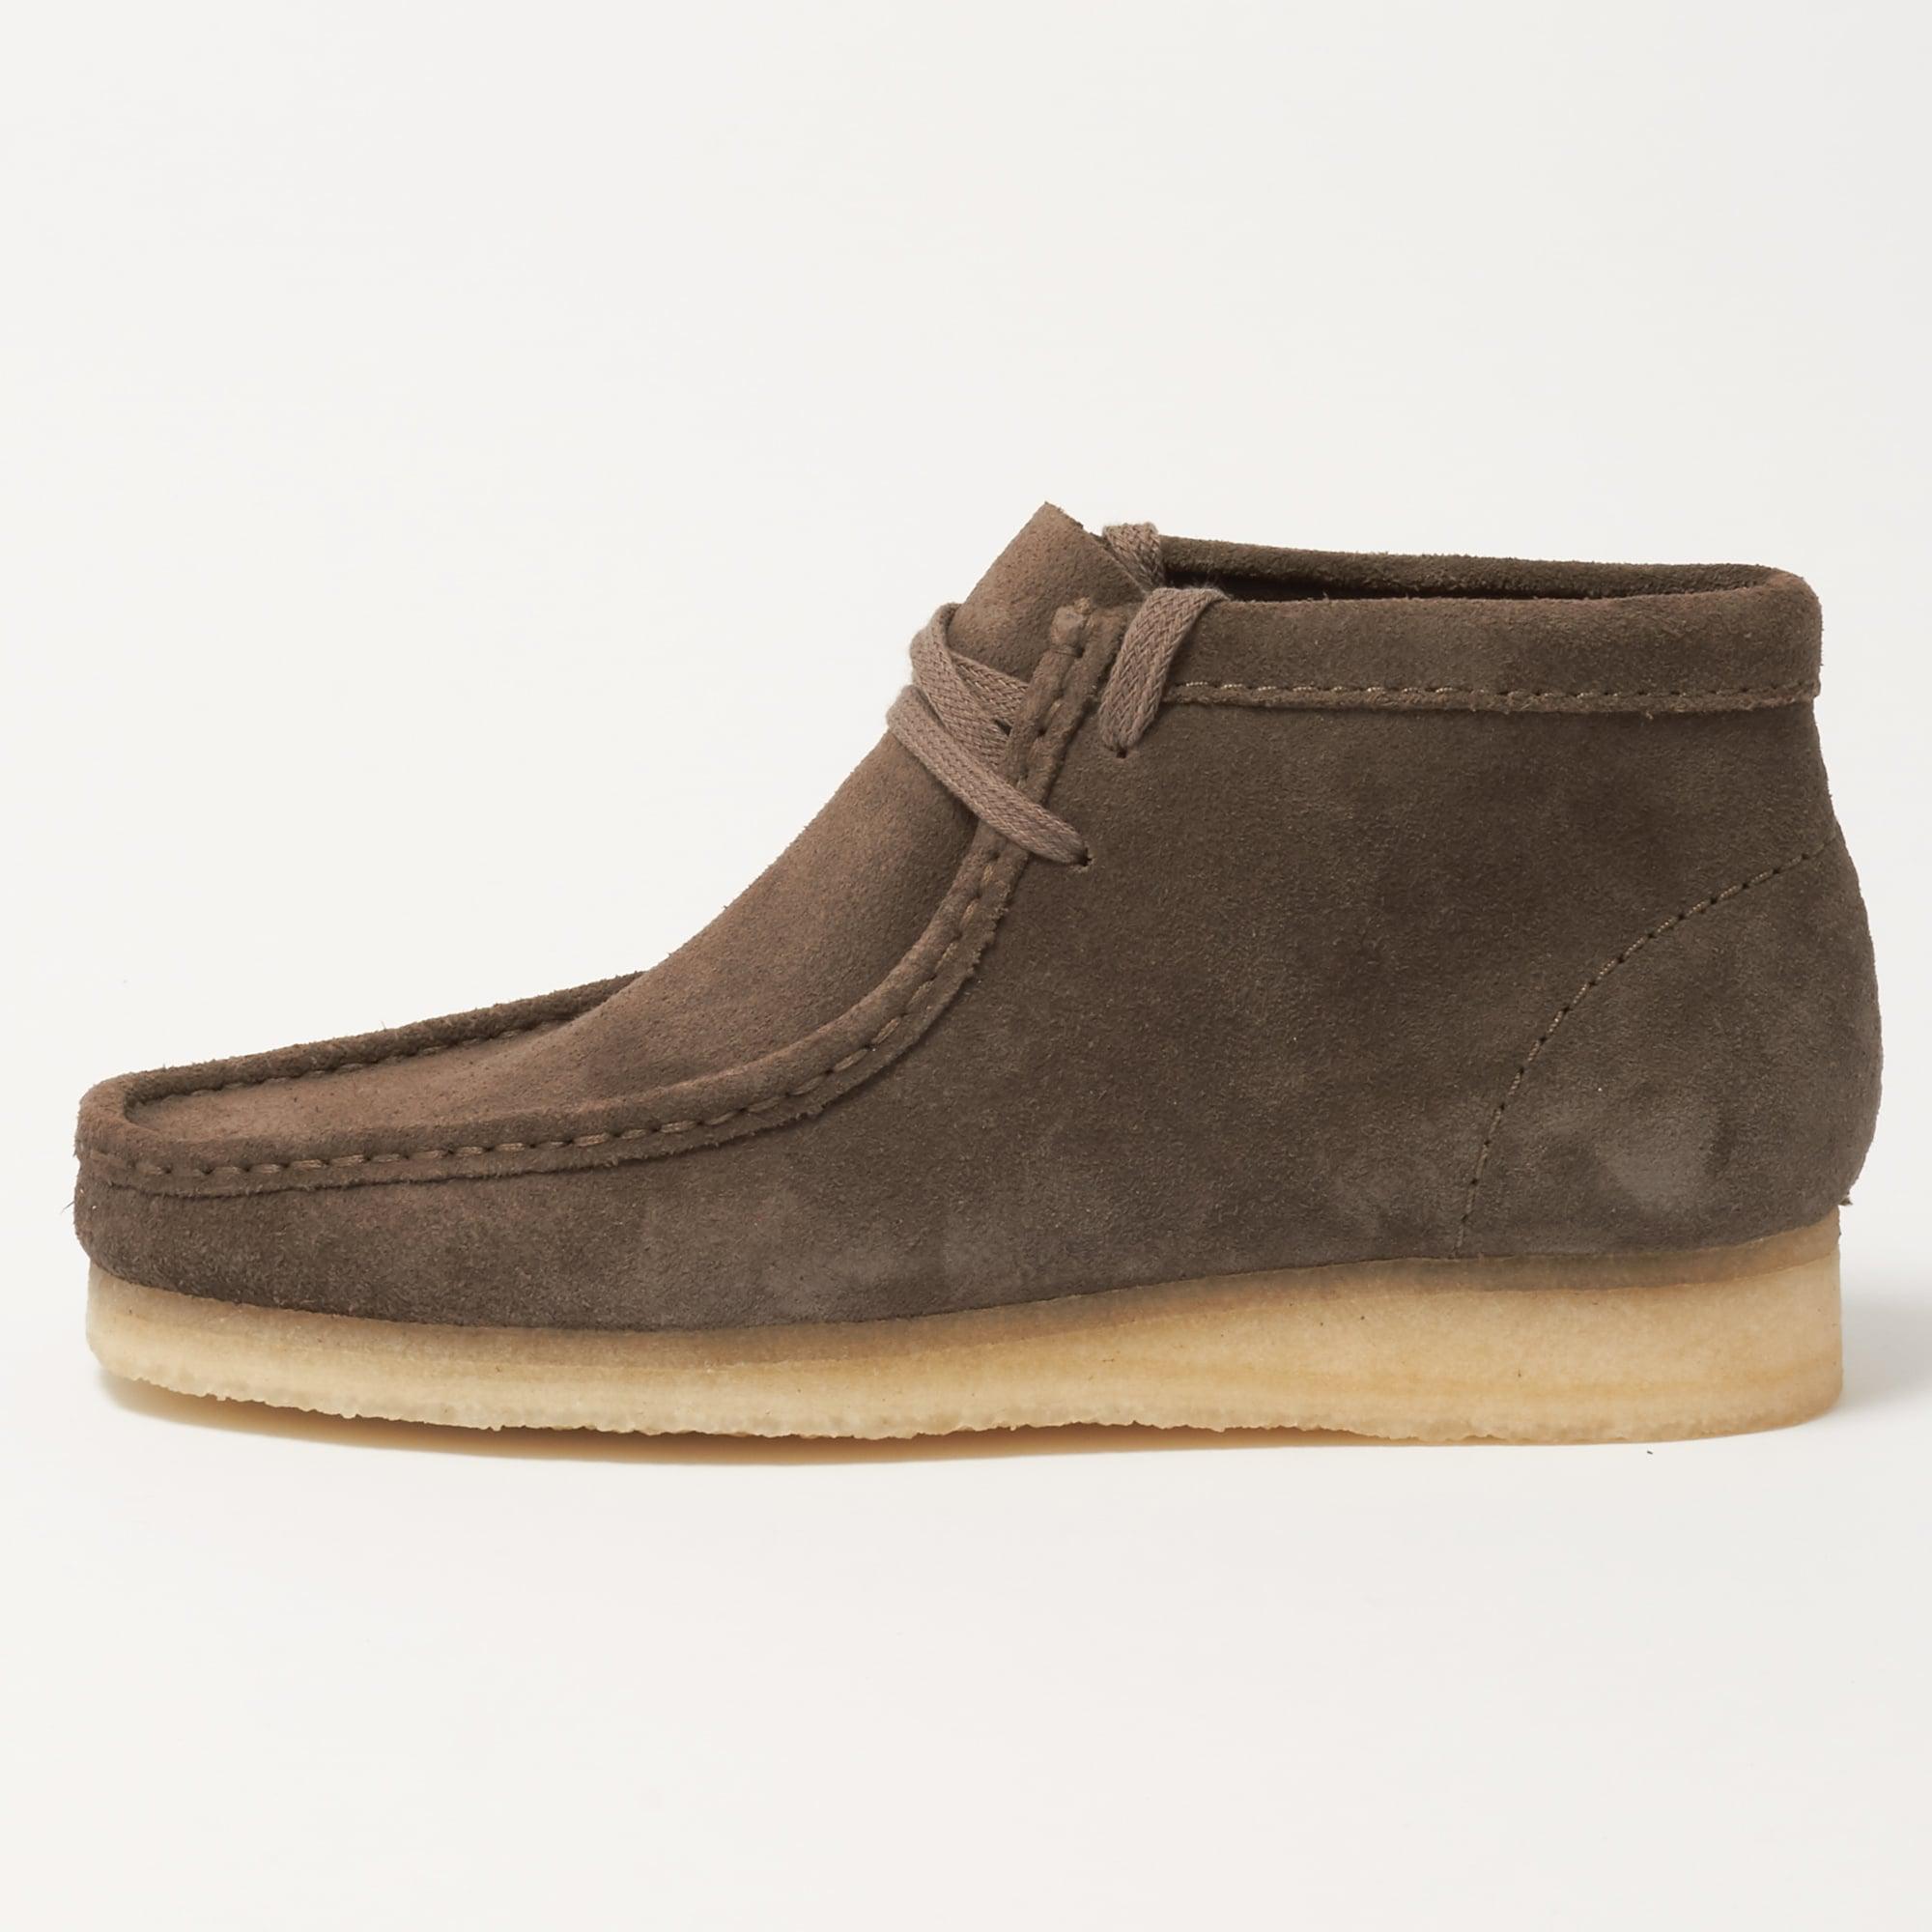 Clarks Grey Suede Wallabee Boot in Gray for Men - Lyst